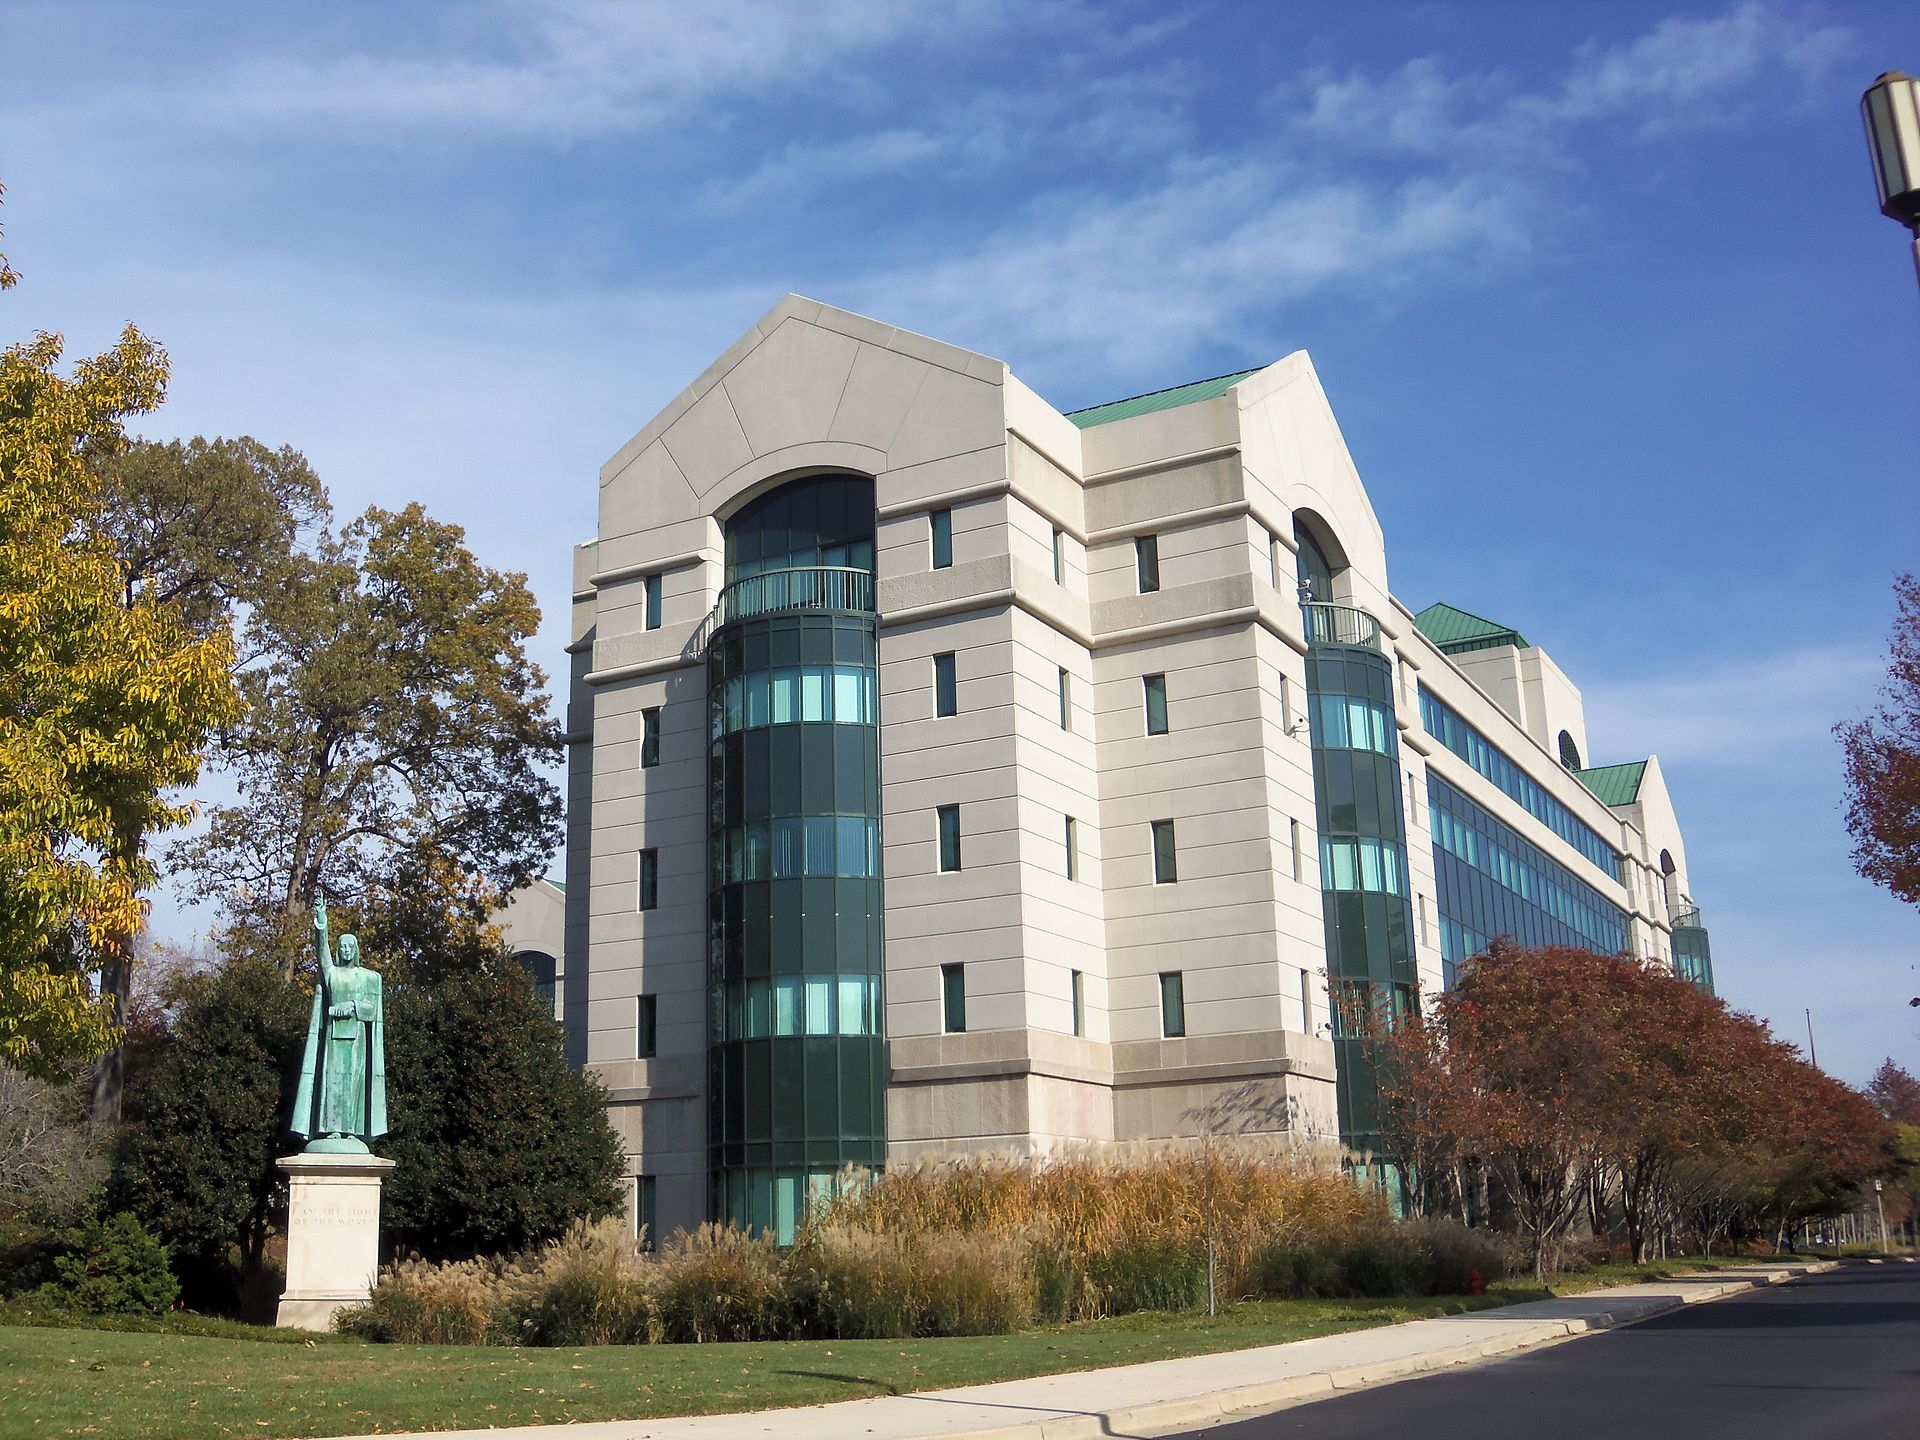 Headquarters of the US Conference of Catholic Bishops, who do not care that 63% of Catholic women support the contraception mandate.